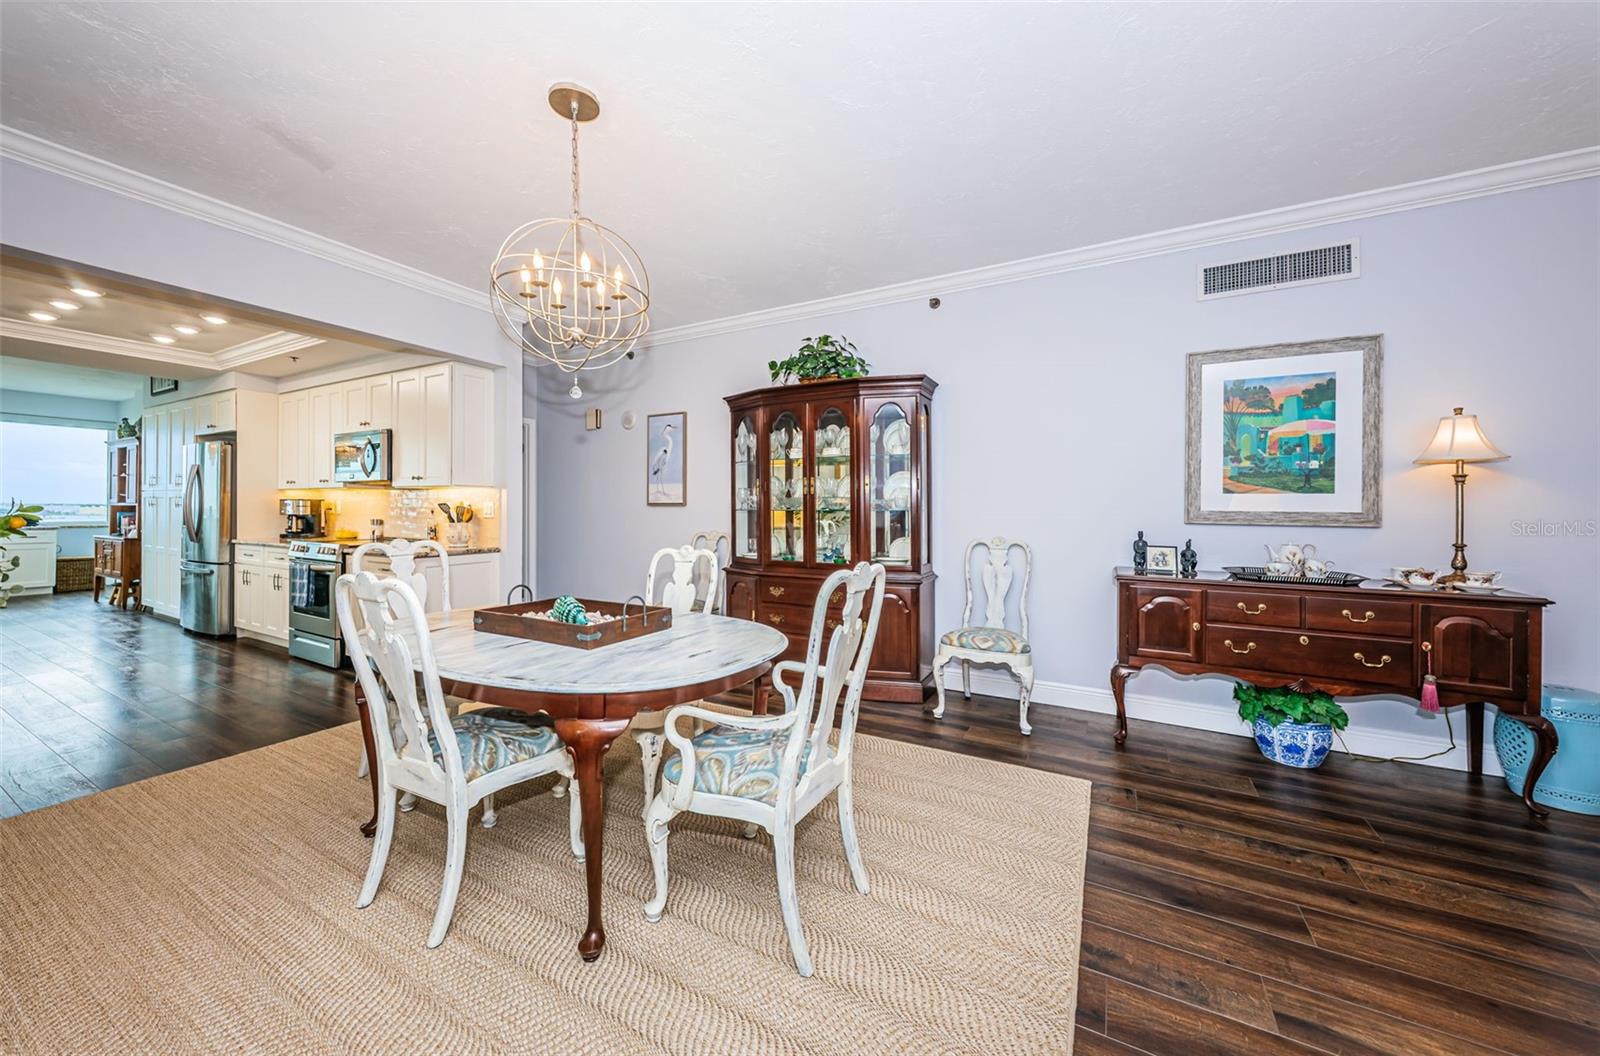 Entertain or just enjoy everyday Dining in the Dining Area off the Kitchen